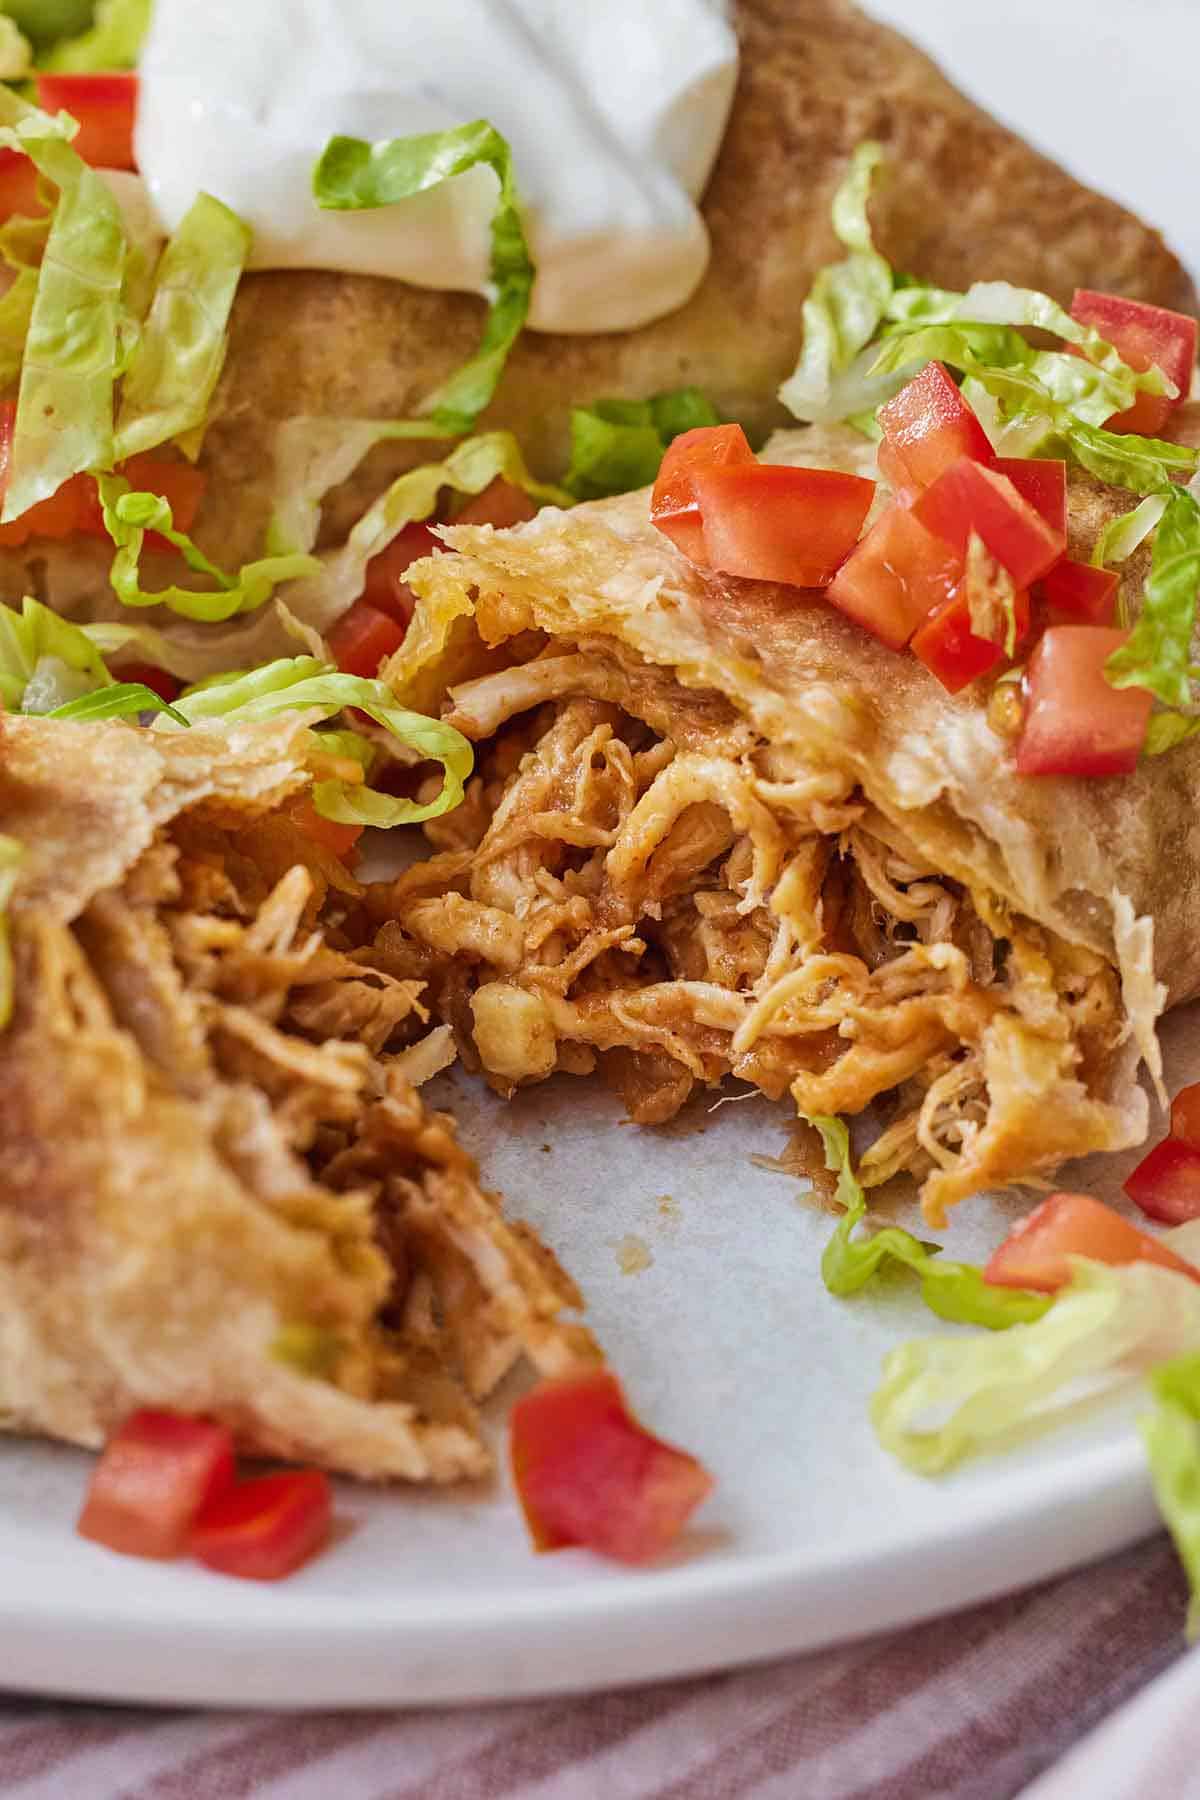 A chicken chimichanga cut in half, showing the shredded chicken inside.